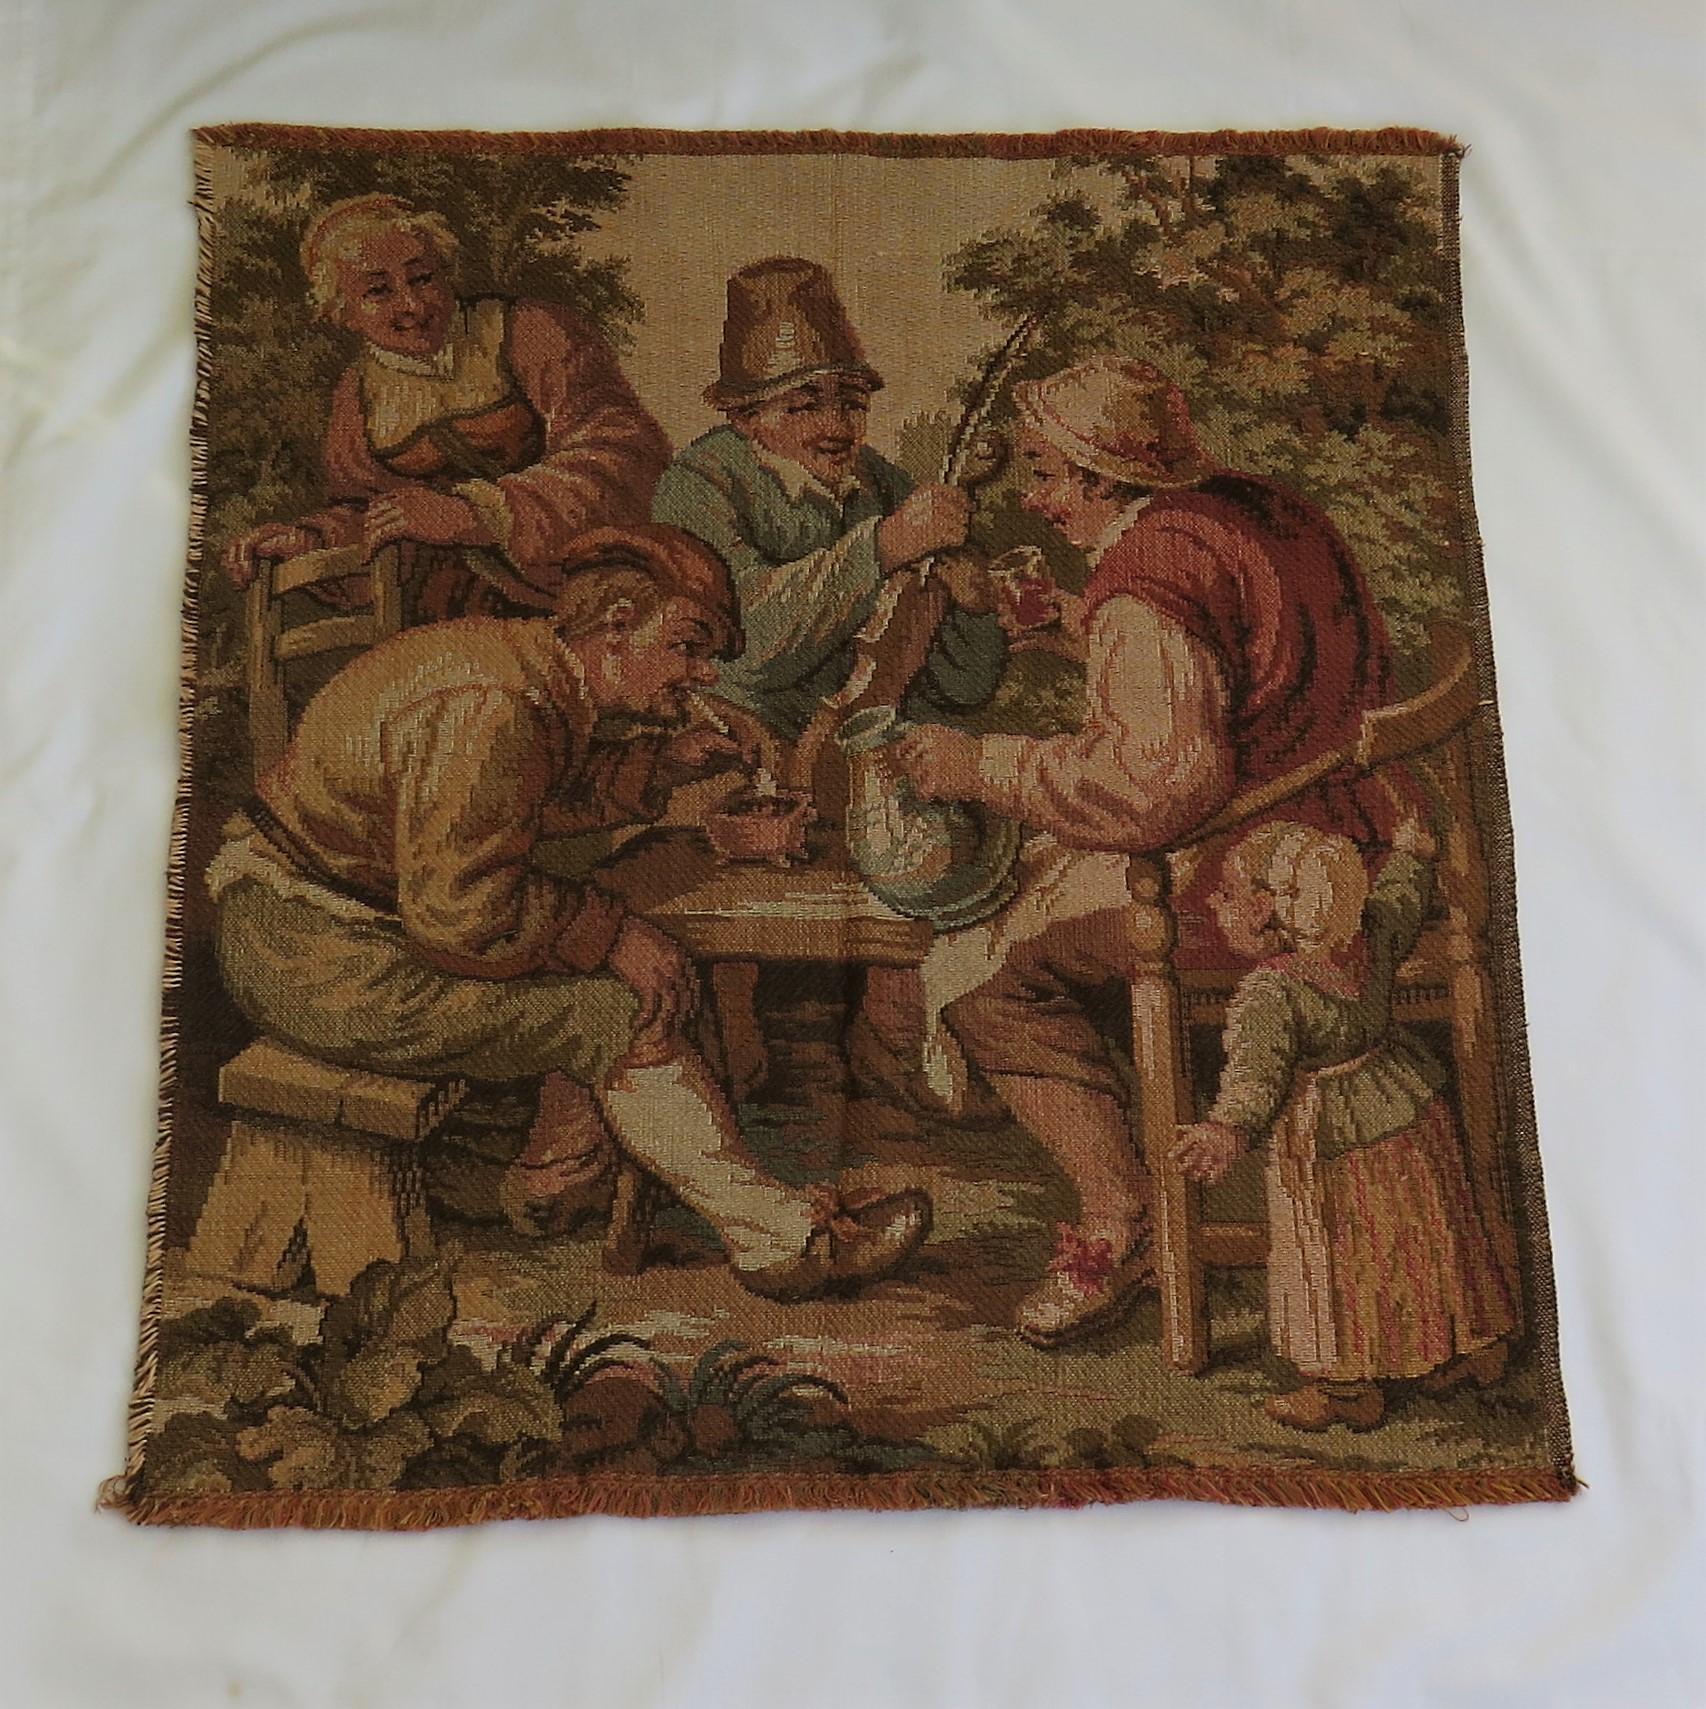 This is a vintage French woven tapestry panel, in the Aubusson style, showing a group of figures in period costumes, dating to the early 20th century, circa 1930.

This is a woven panel measuring 23.5 inches wide by 26 inches high with many possible